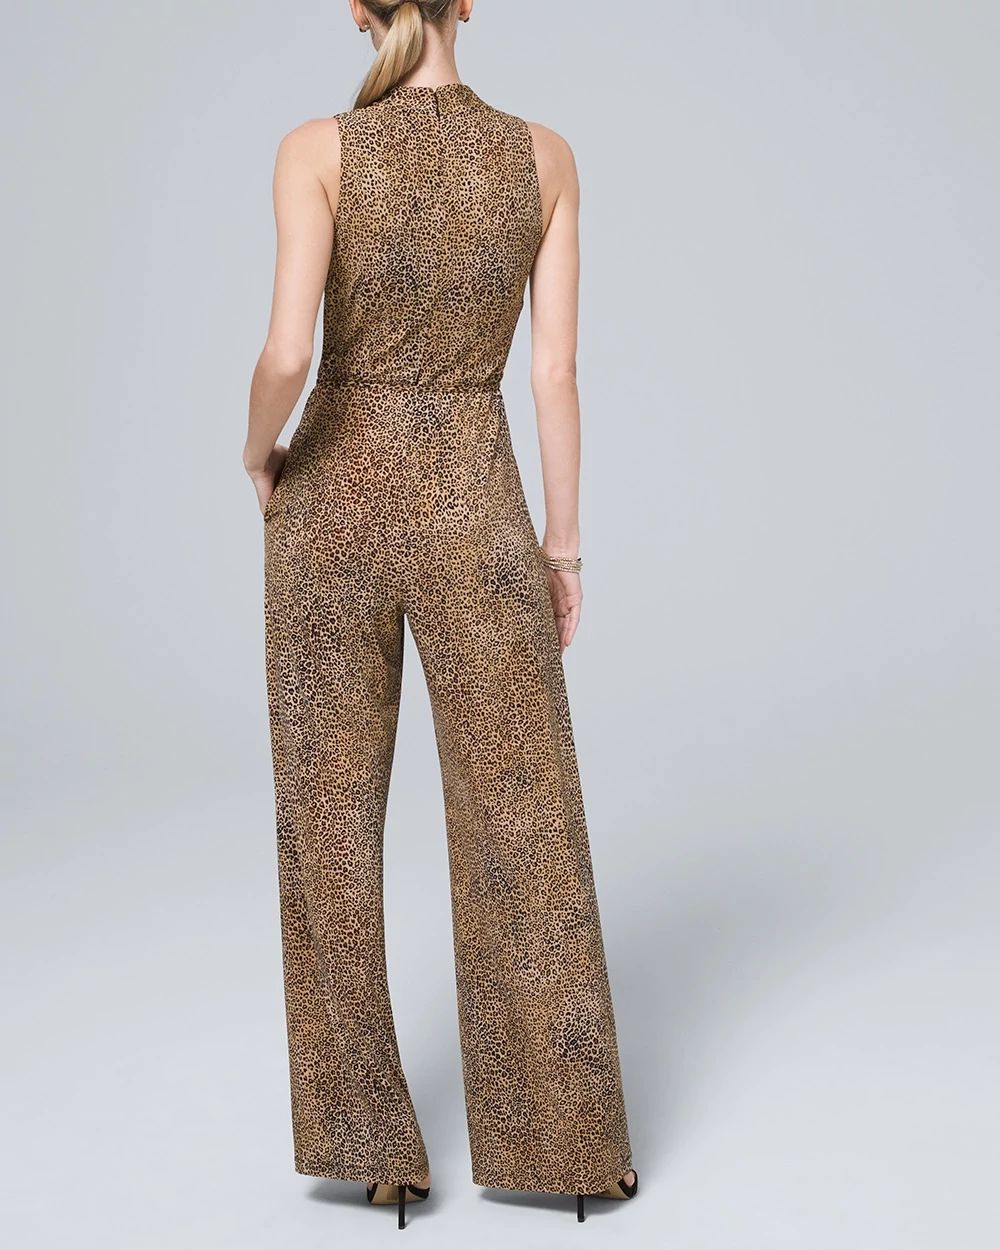 Leopard-Print Jersey Knit Jumpsuit click to view larger image.